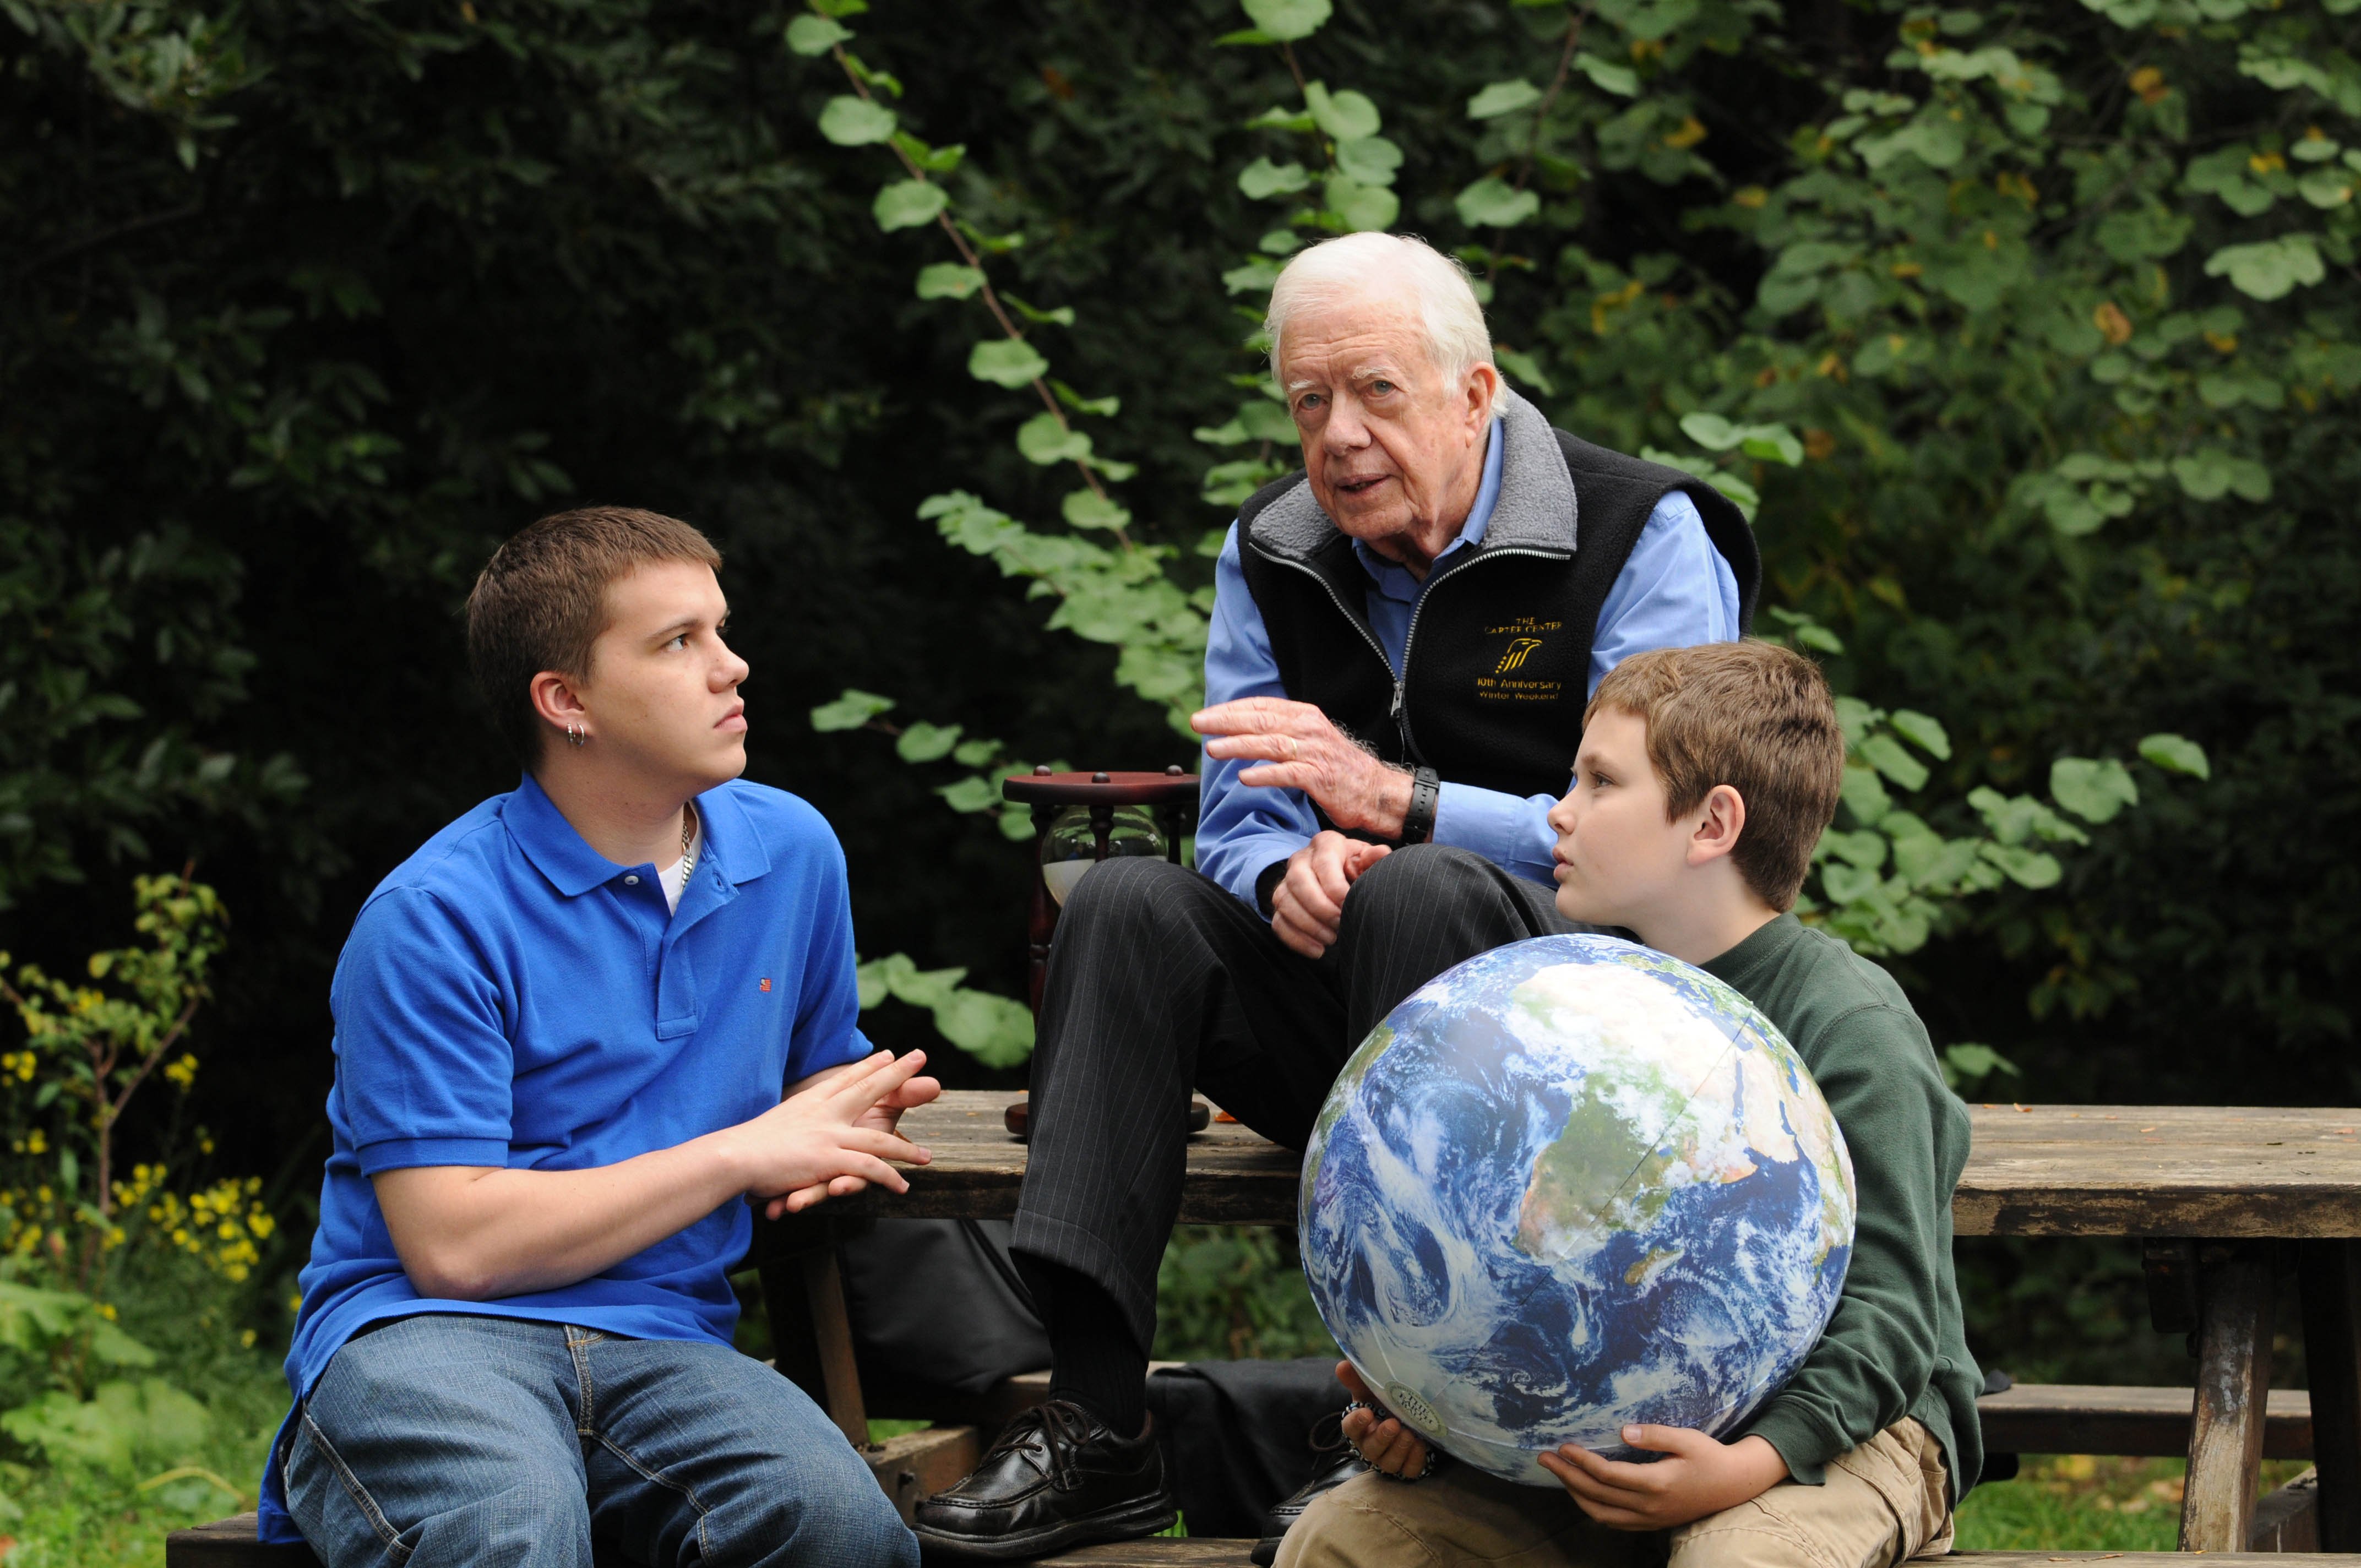 Jimmy Carter talks with grandsons Jeremy Carter and Hugo Wentzel, during a picnic event in Istanbul, Turkey, on October 31, 2009. | Source: Getty Images